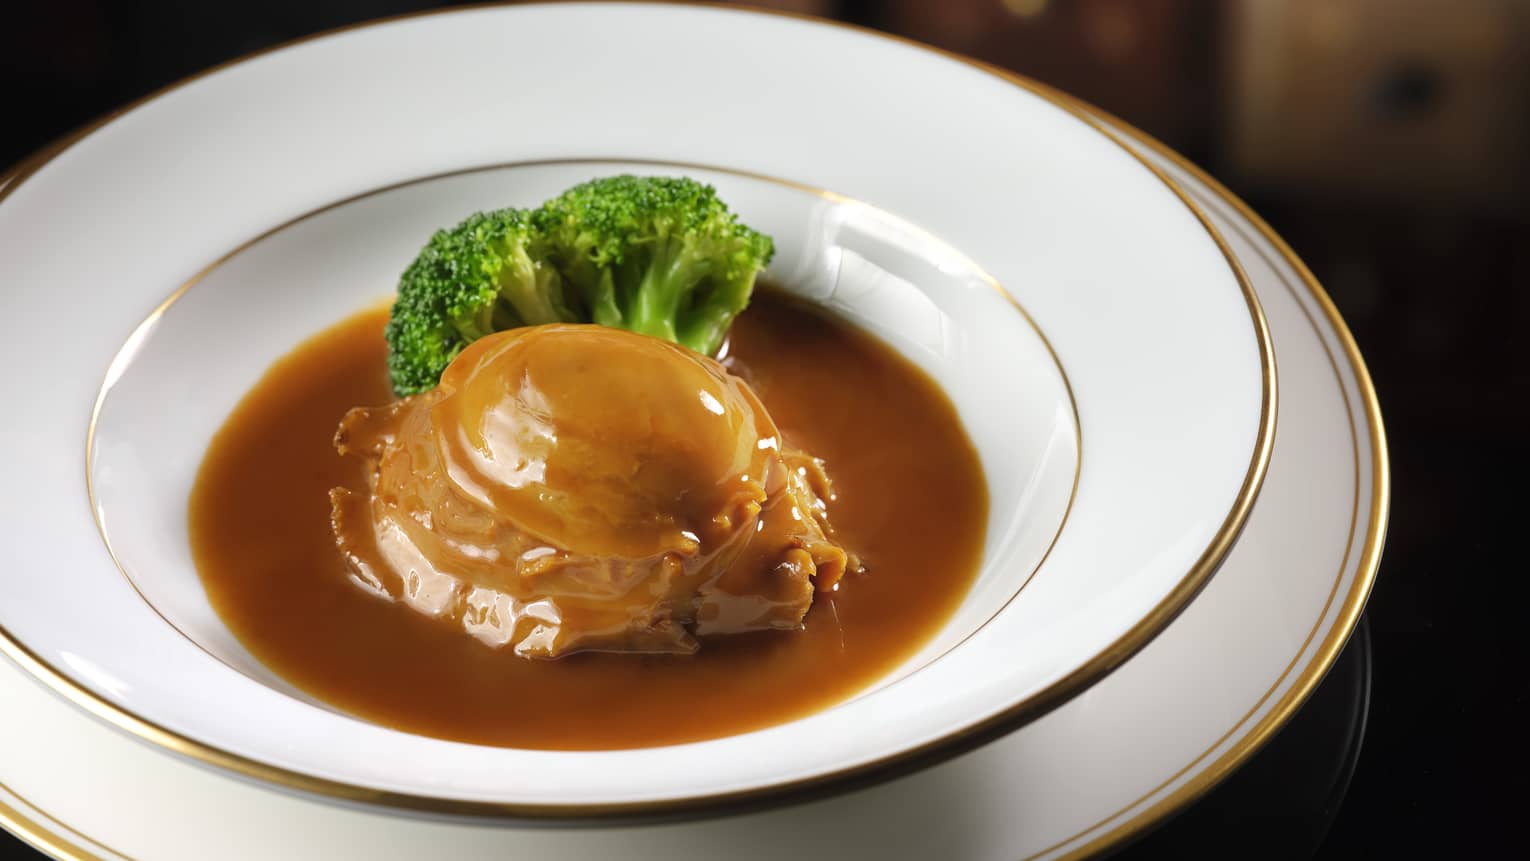 Gold rimmed white bowl with entree, brown sauce and broccoli